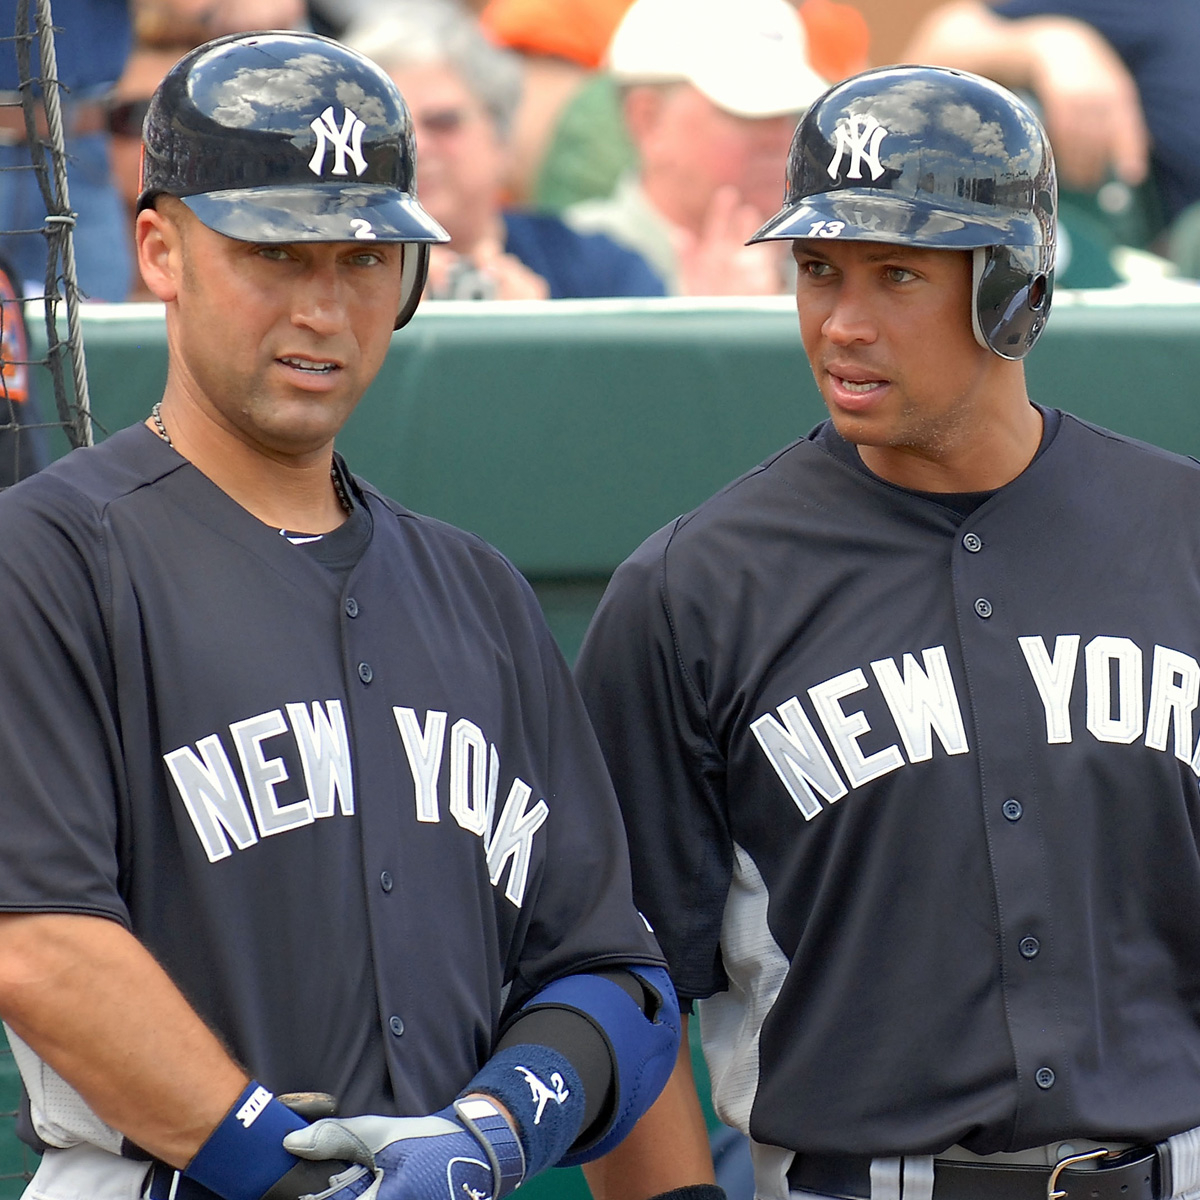 Alex Rodriguez: 'If you can't sell Aaron Judge, you can't sell anyone', Alex Rodriguez